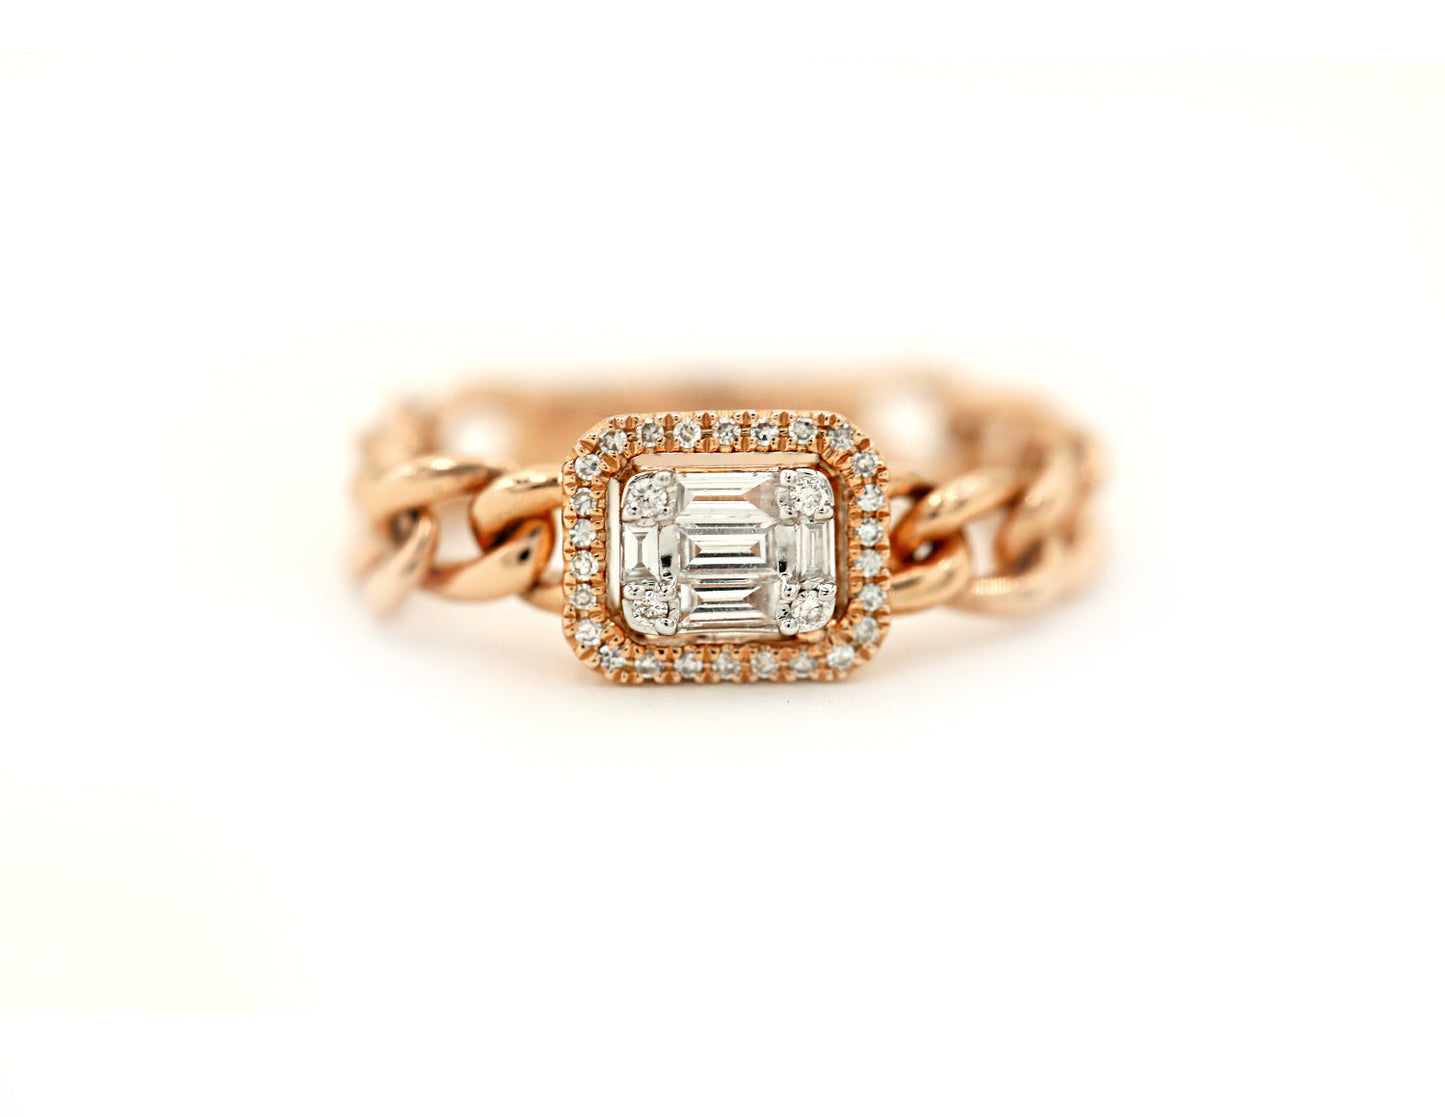 14k Rose Gold Diamond Pave and Diamond Baguette Chain Link Ring